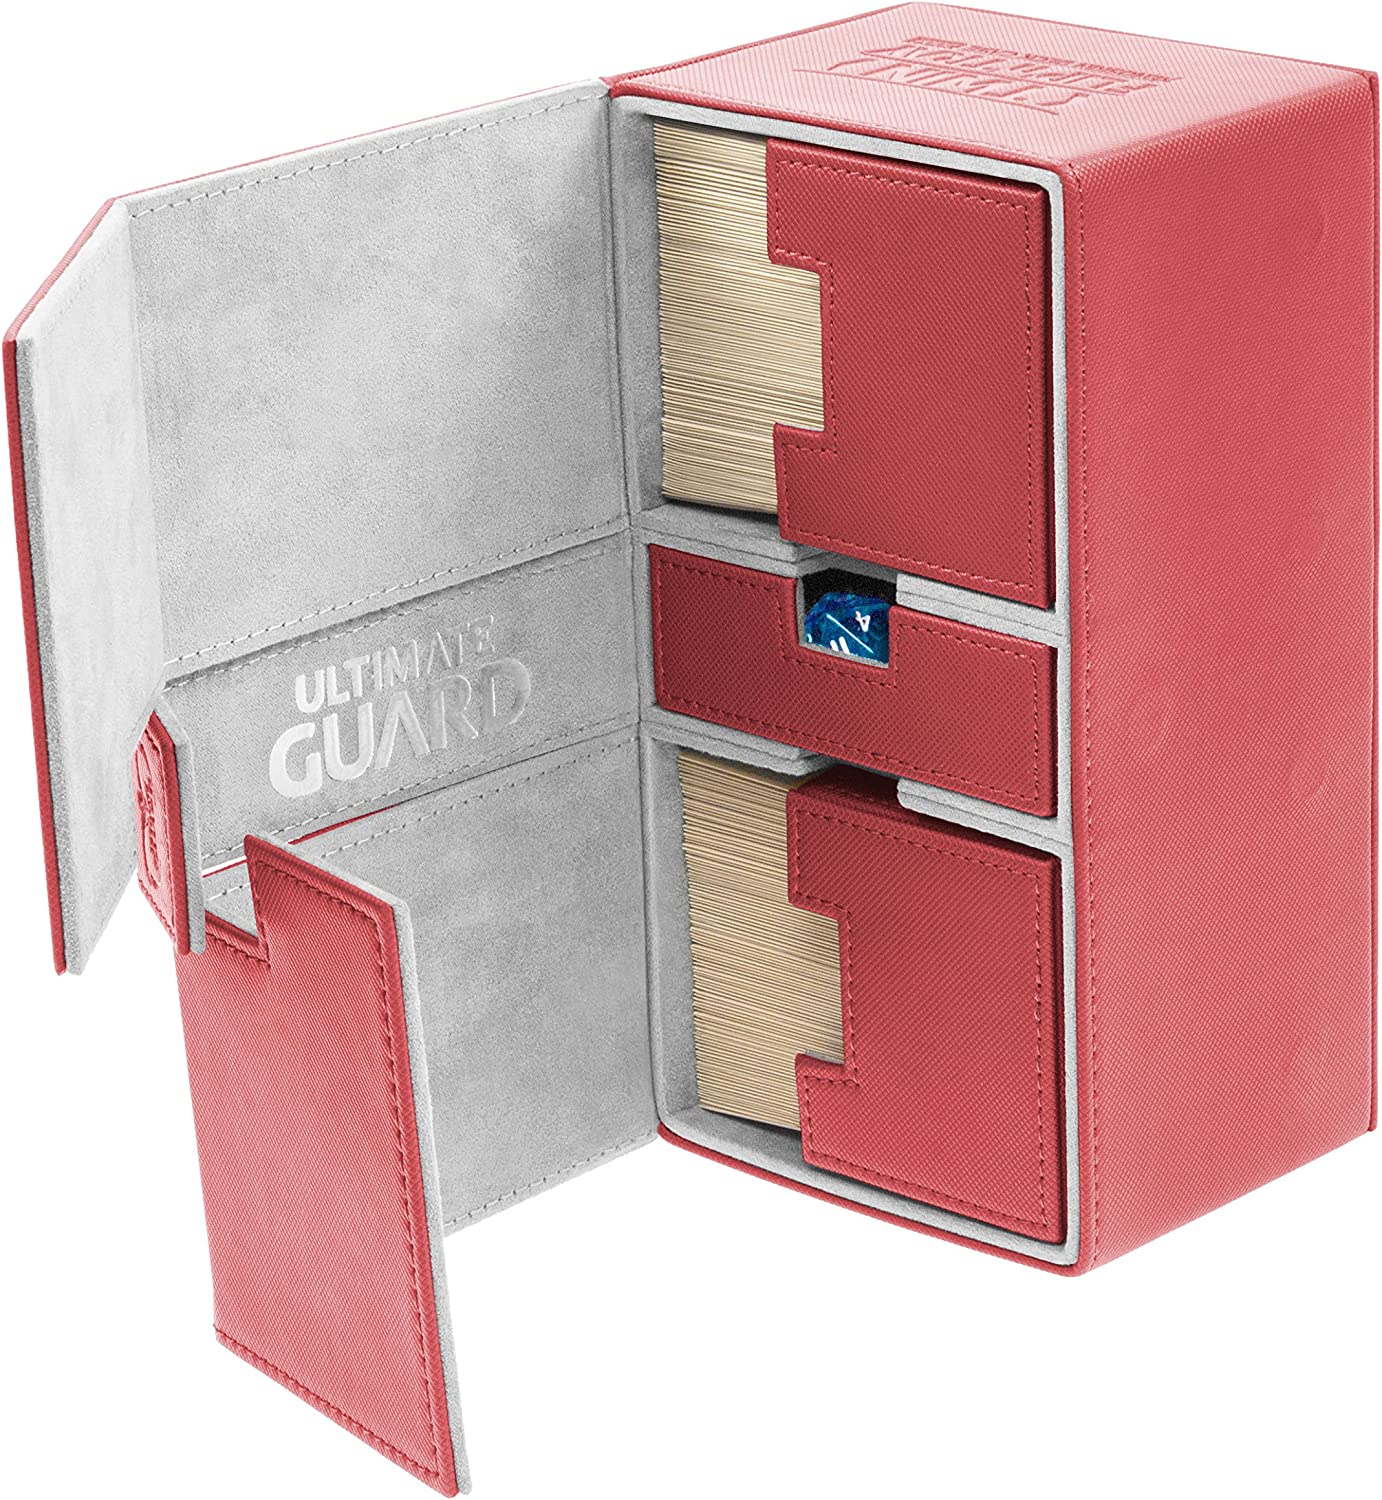 Ultimate Guard 200+ Twin Flip n Tray Deck Case - Red